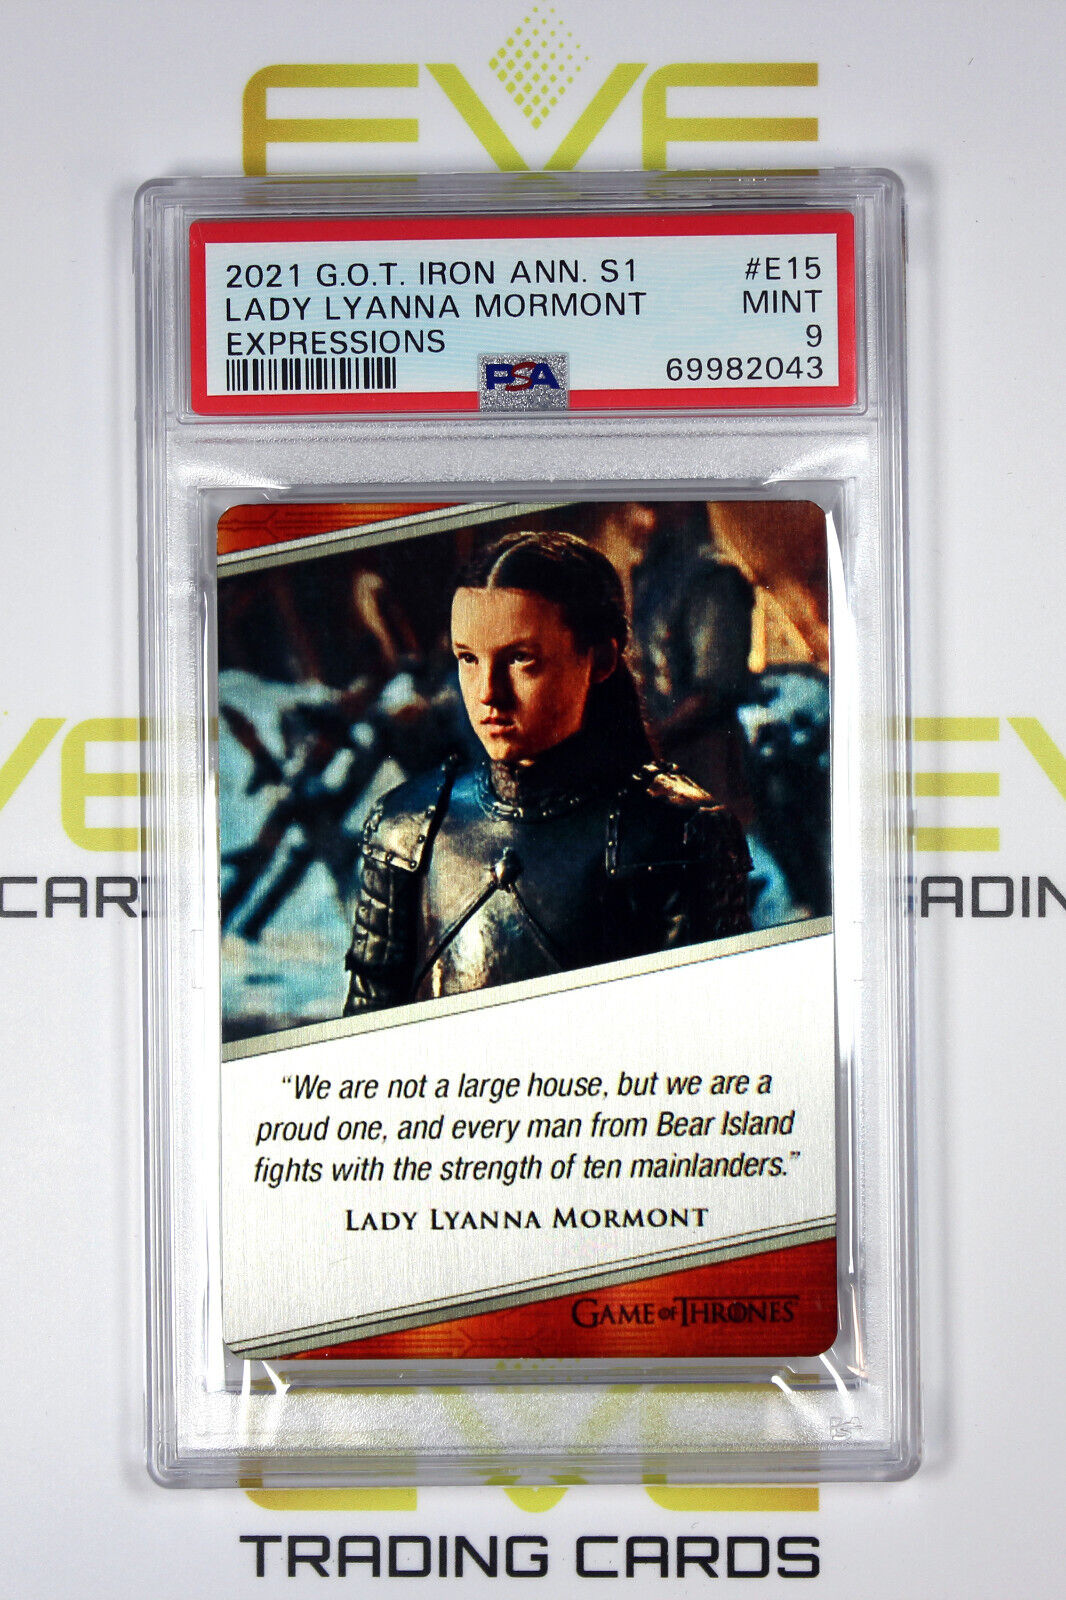 Graded Game of Thrones Card - #E15 2021 Lady Lyanna Mormont - Expressions -PSA 9